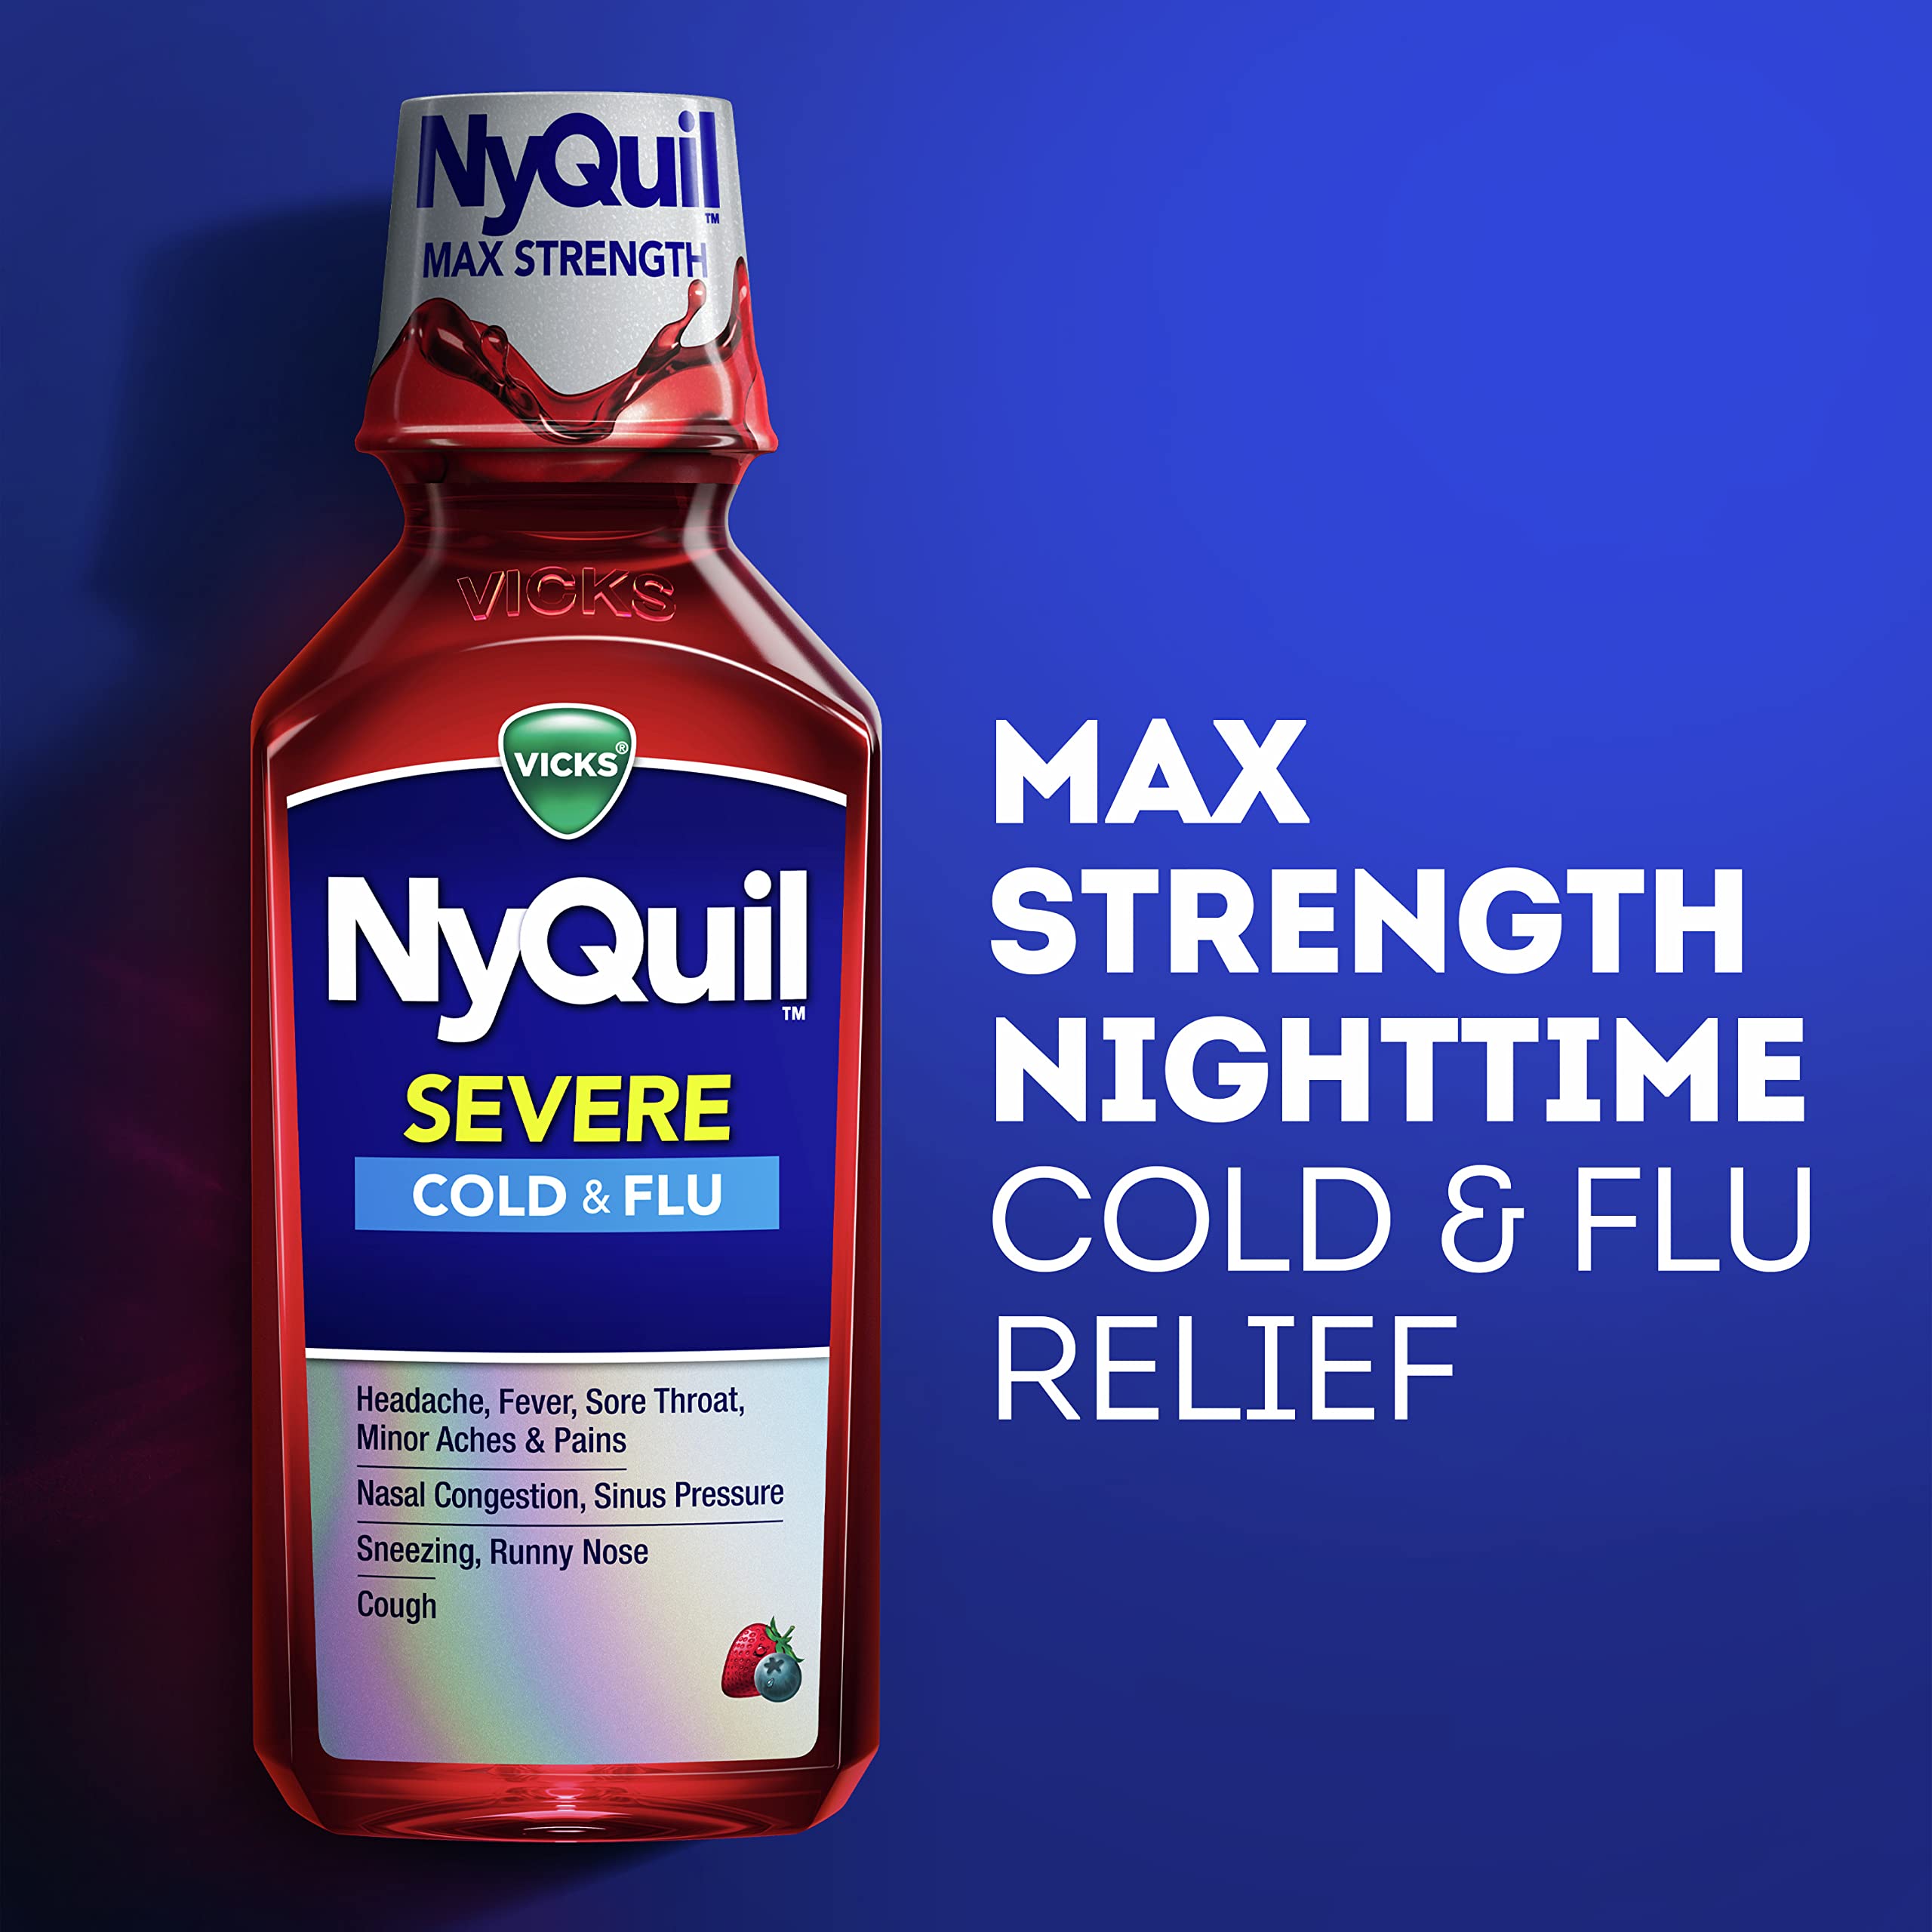 Vicks NyQuil SEVERE Cold & Flu Liquid Berry Flavored Medicine, Max Strength Nighttime Relief for Fever, Sore Throat, Minor Aches And Pains, Nasal Congestion, Sneezing, Cough, Twin Pack, 2 x 12 FL OZ